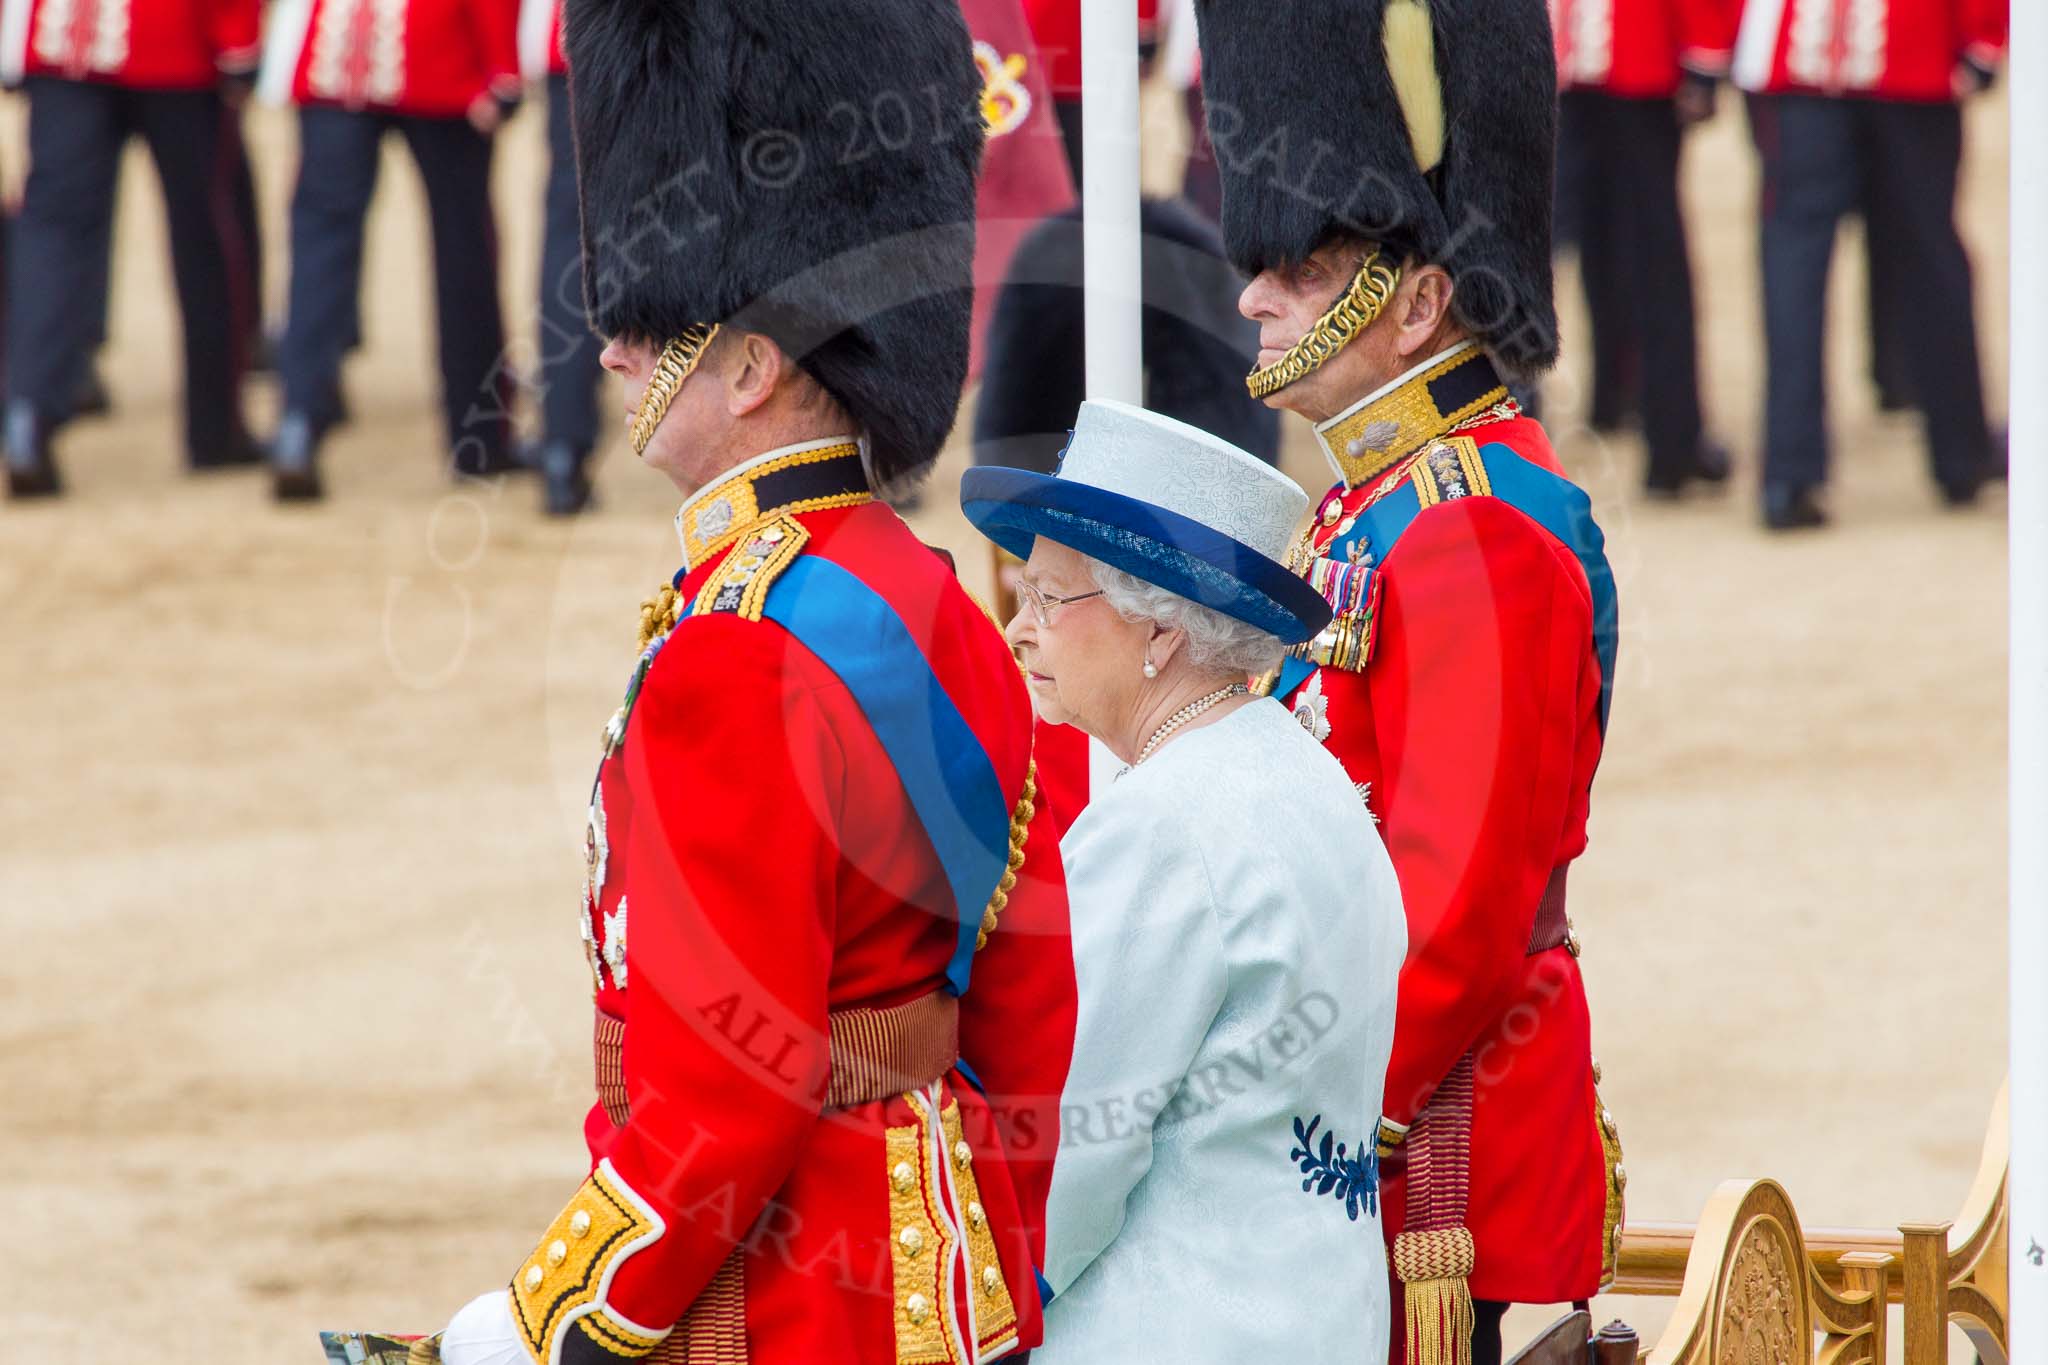 Trooping the Colour 2014.
Horse Guards Parade, Westminster,
London SW1A,

United Kingdom,
on 14 June 2014 at 11:39, image #645